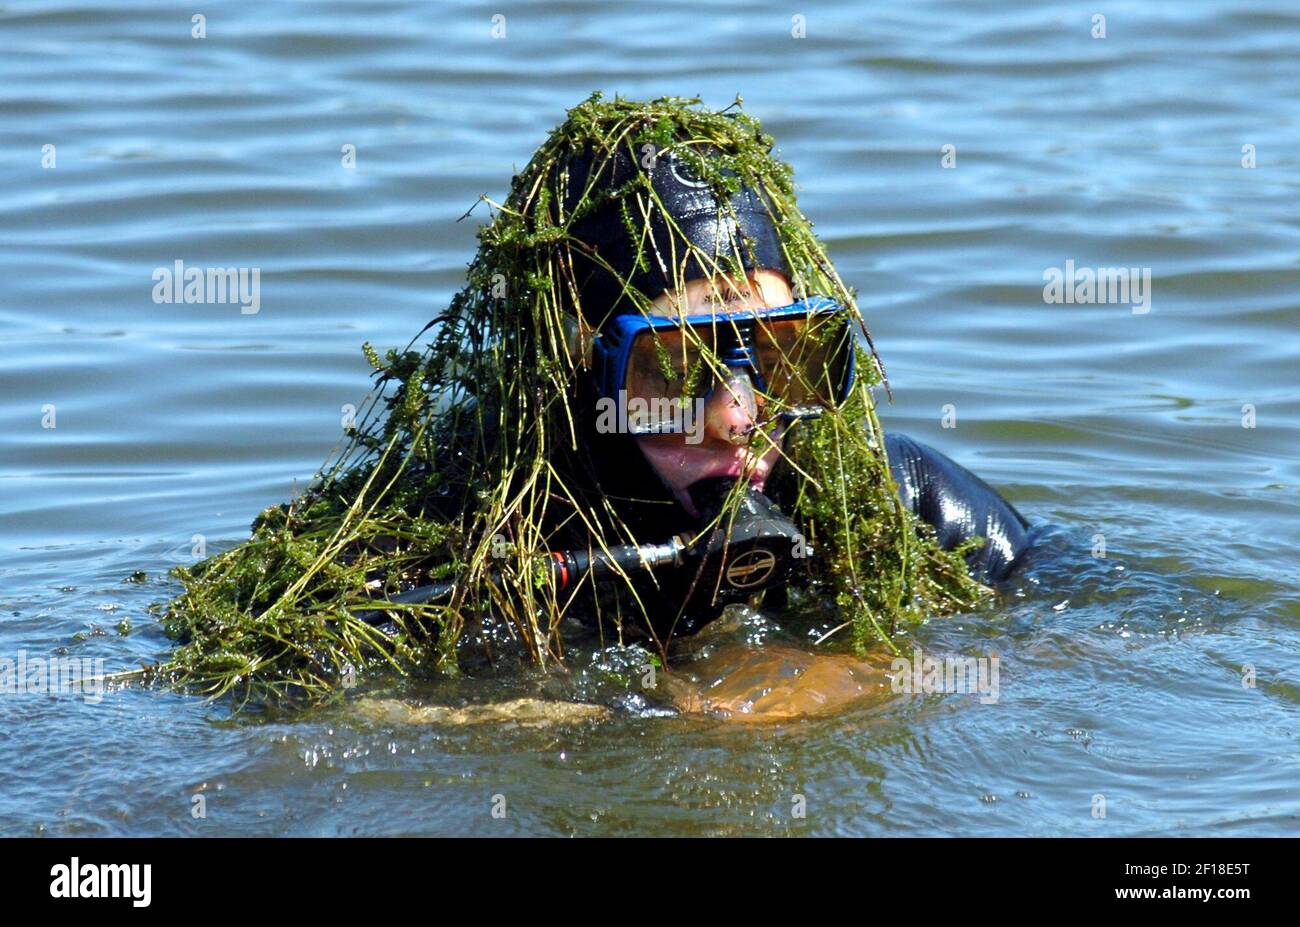 KRT SPORTS STORY SLUGGED: GLF-GOLFDIVER KRT PHOTOGRAPH BY BEN GARVIN/ST.  PAUL PIONEER PRESS (August 3) Covered in weeds, golfball diver Scott Lokken  comes up to check his location in a pond at